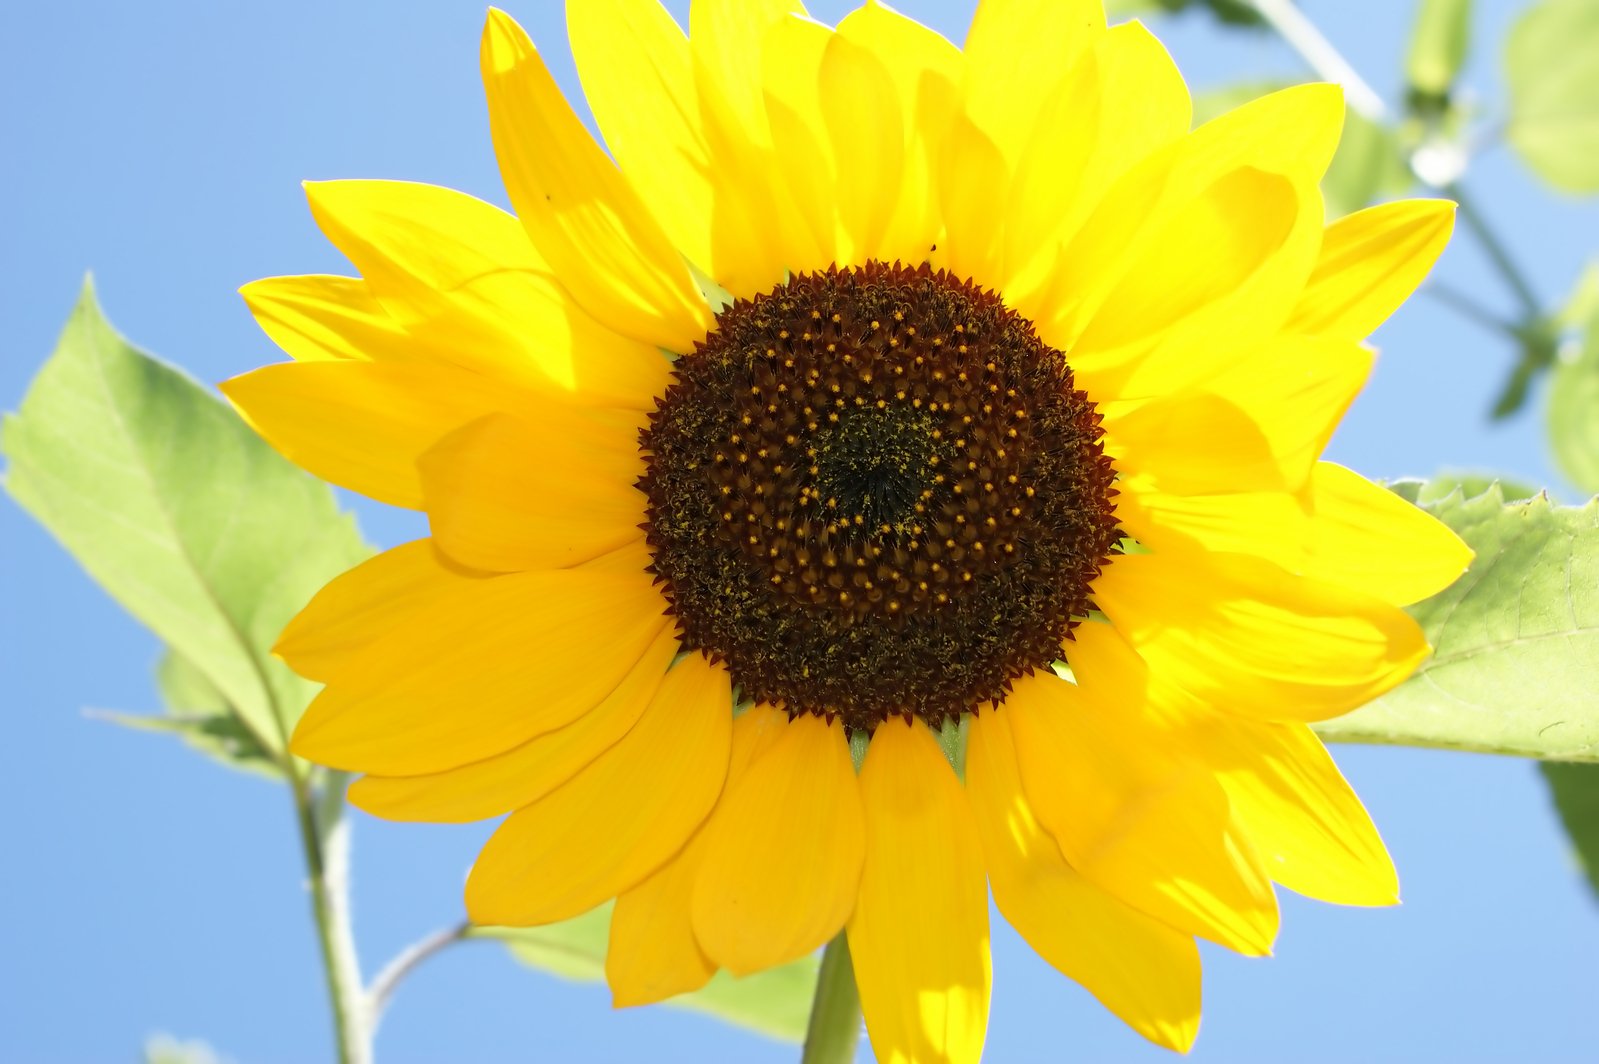 a yellow sunflower with green leaves on it